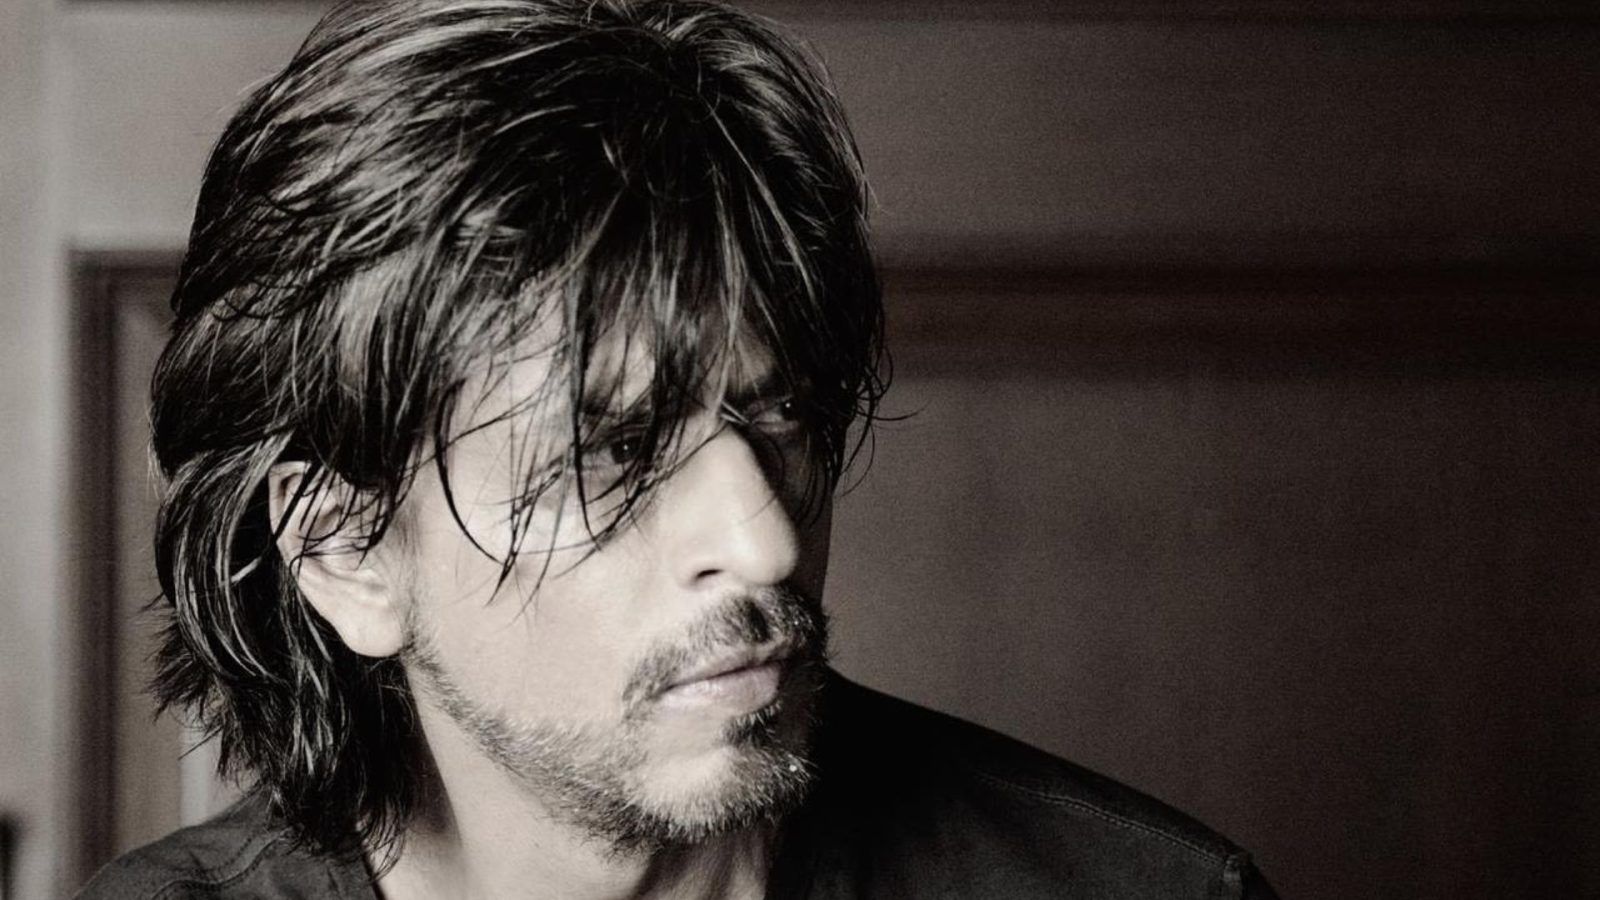 5 Most Expensive Watches Owned By Shah Rukh Khan, Take A Look!